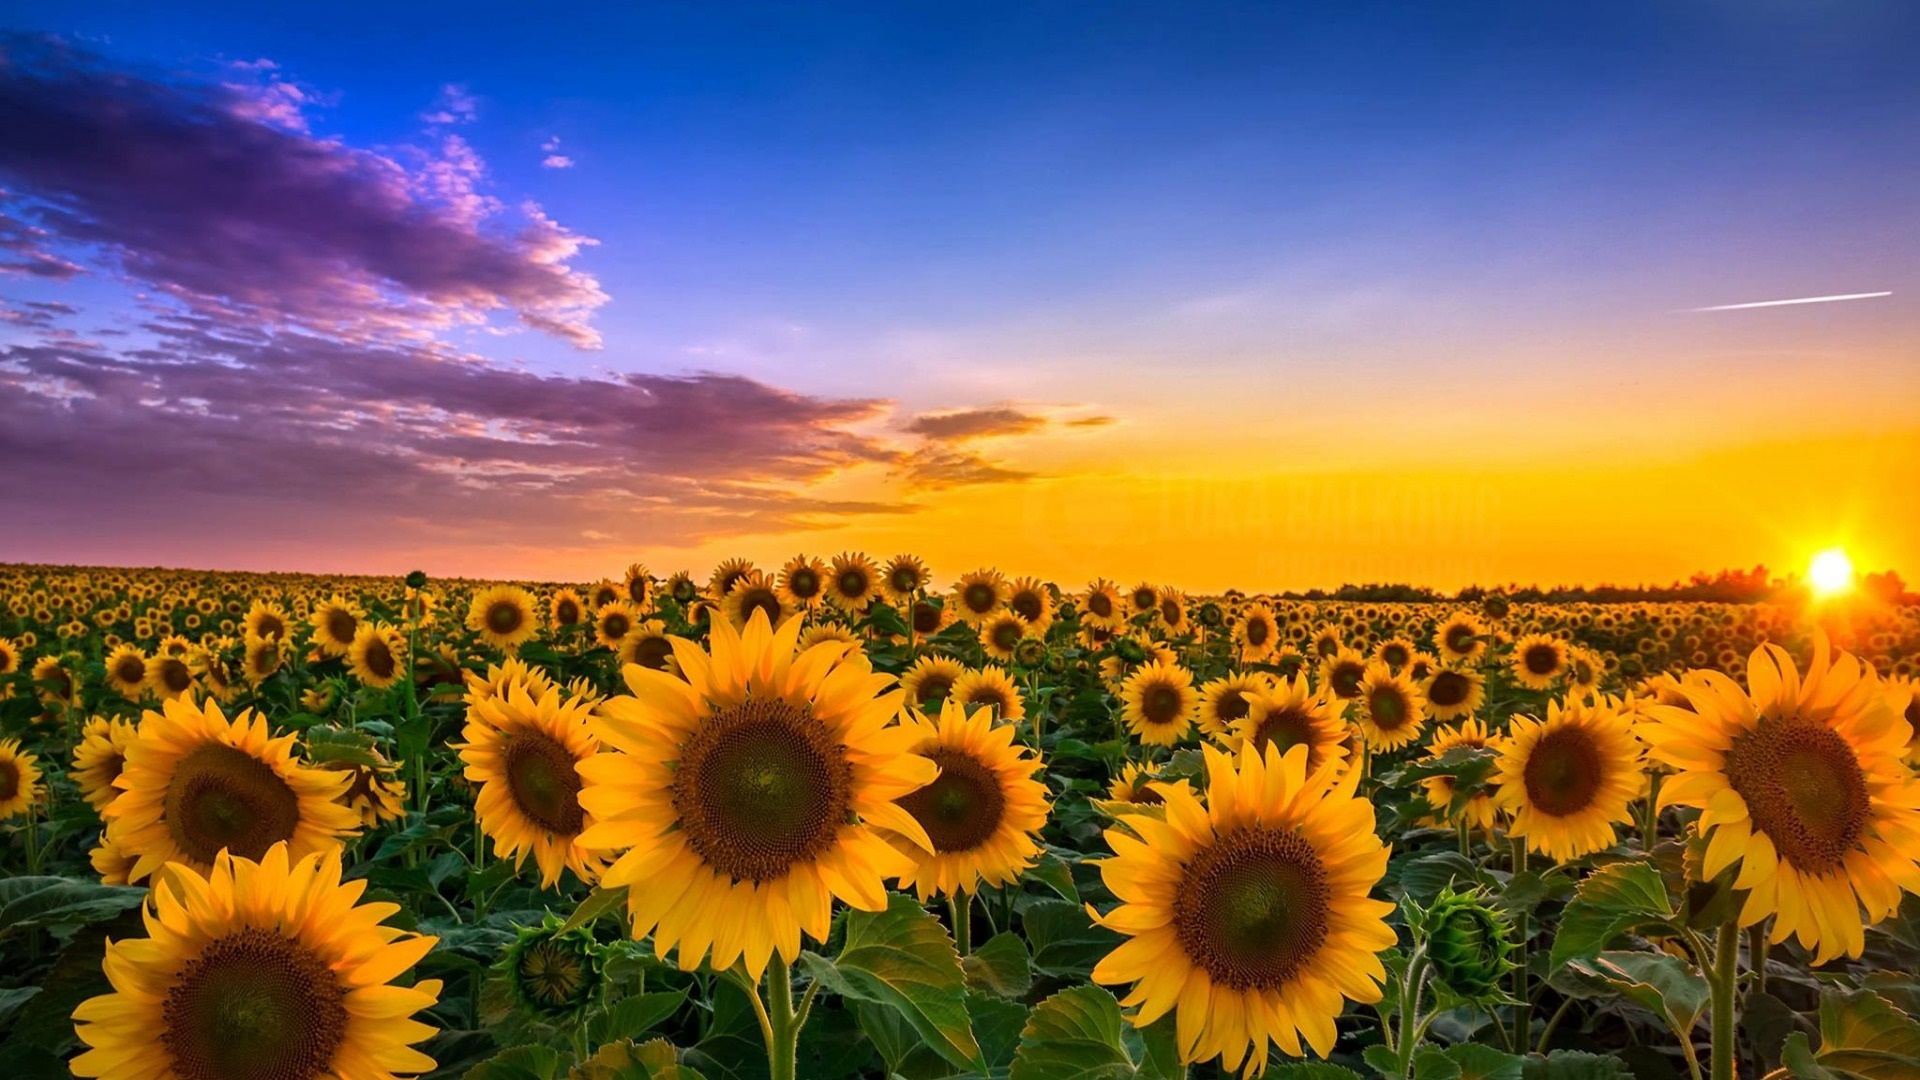 Sunflowers in the sunrise - backiee